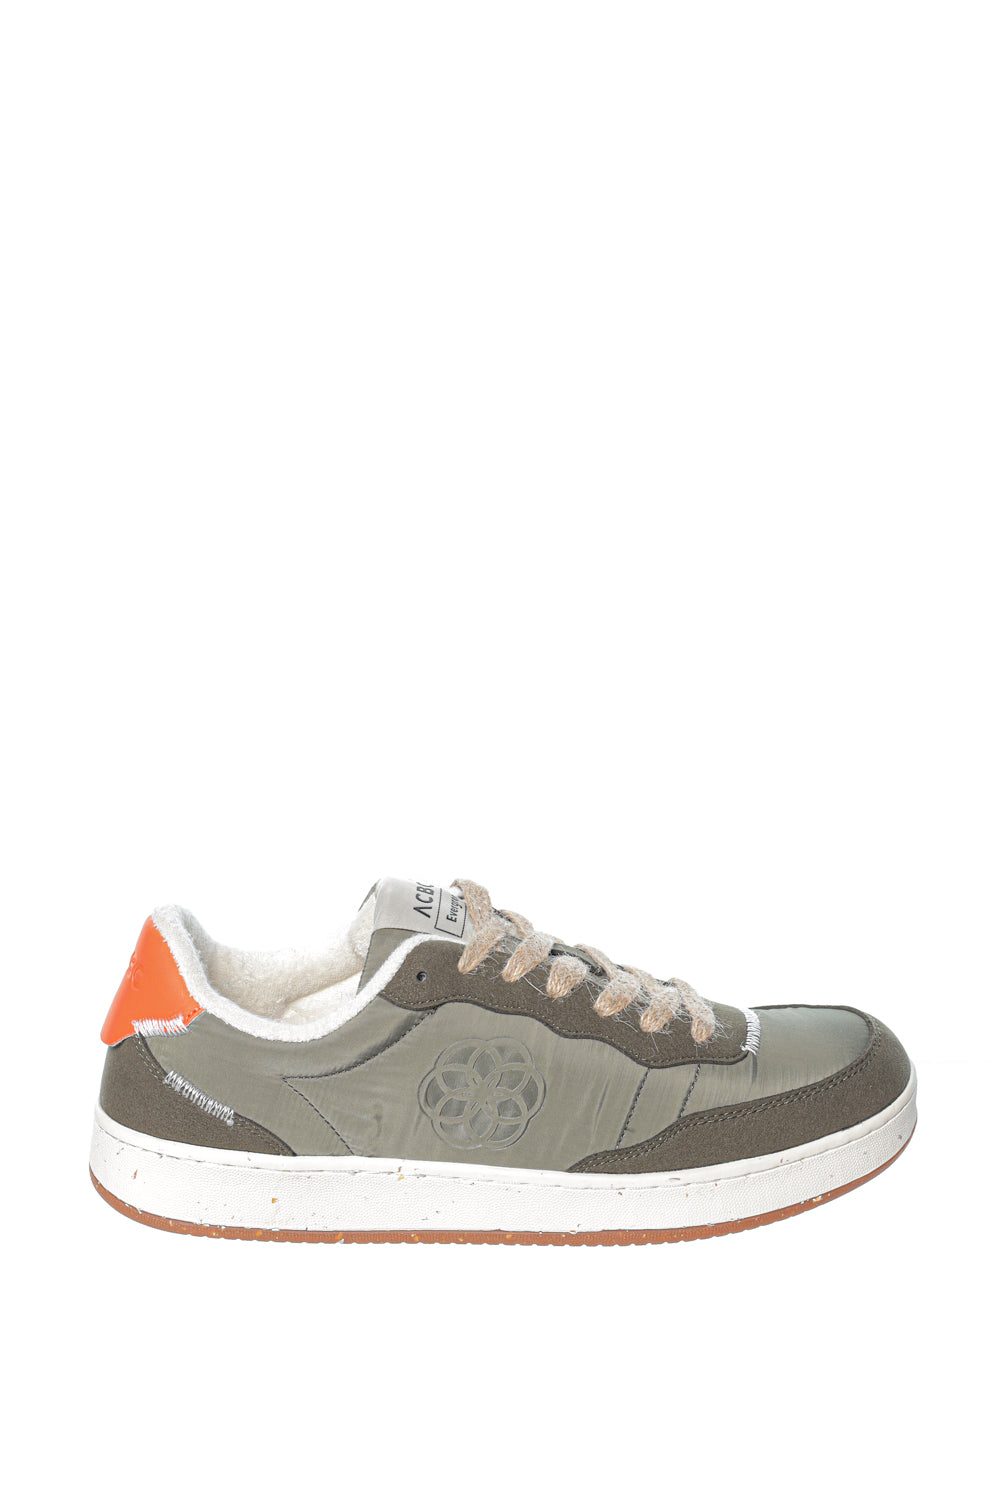 Sneakers ACBC Evergreen Multimaterial